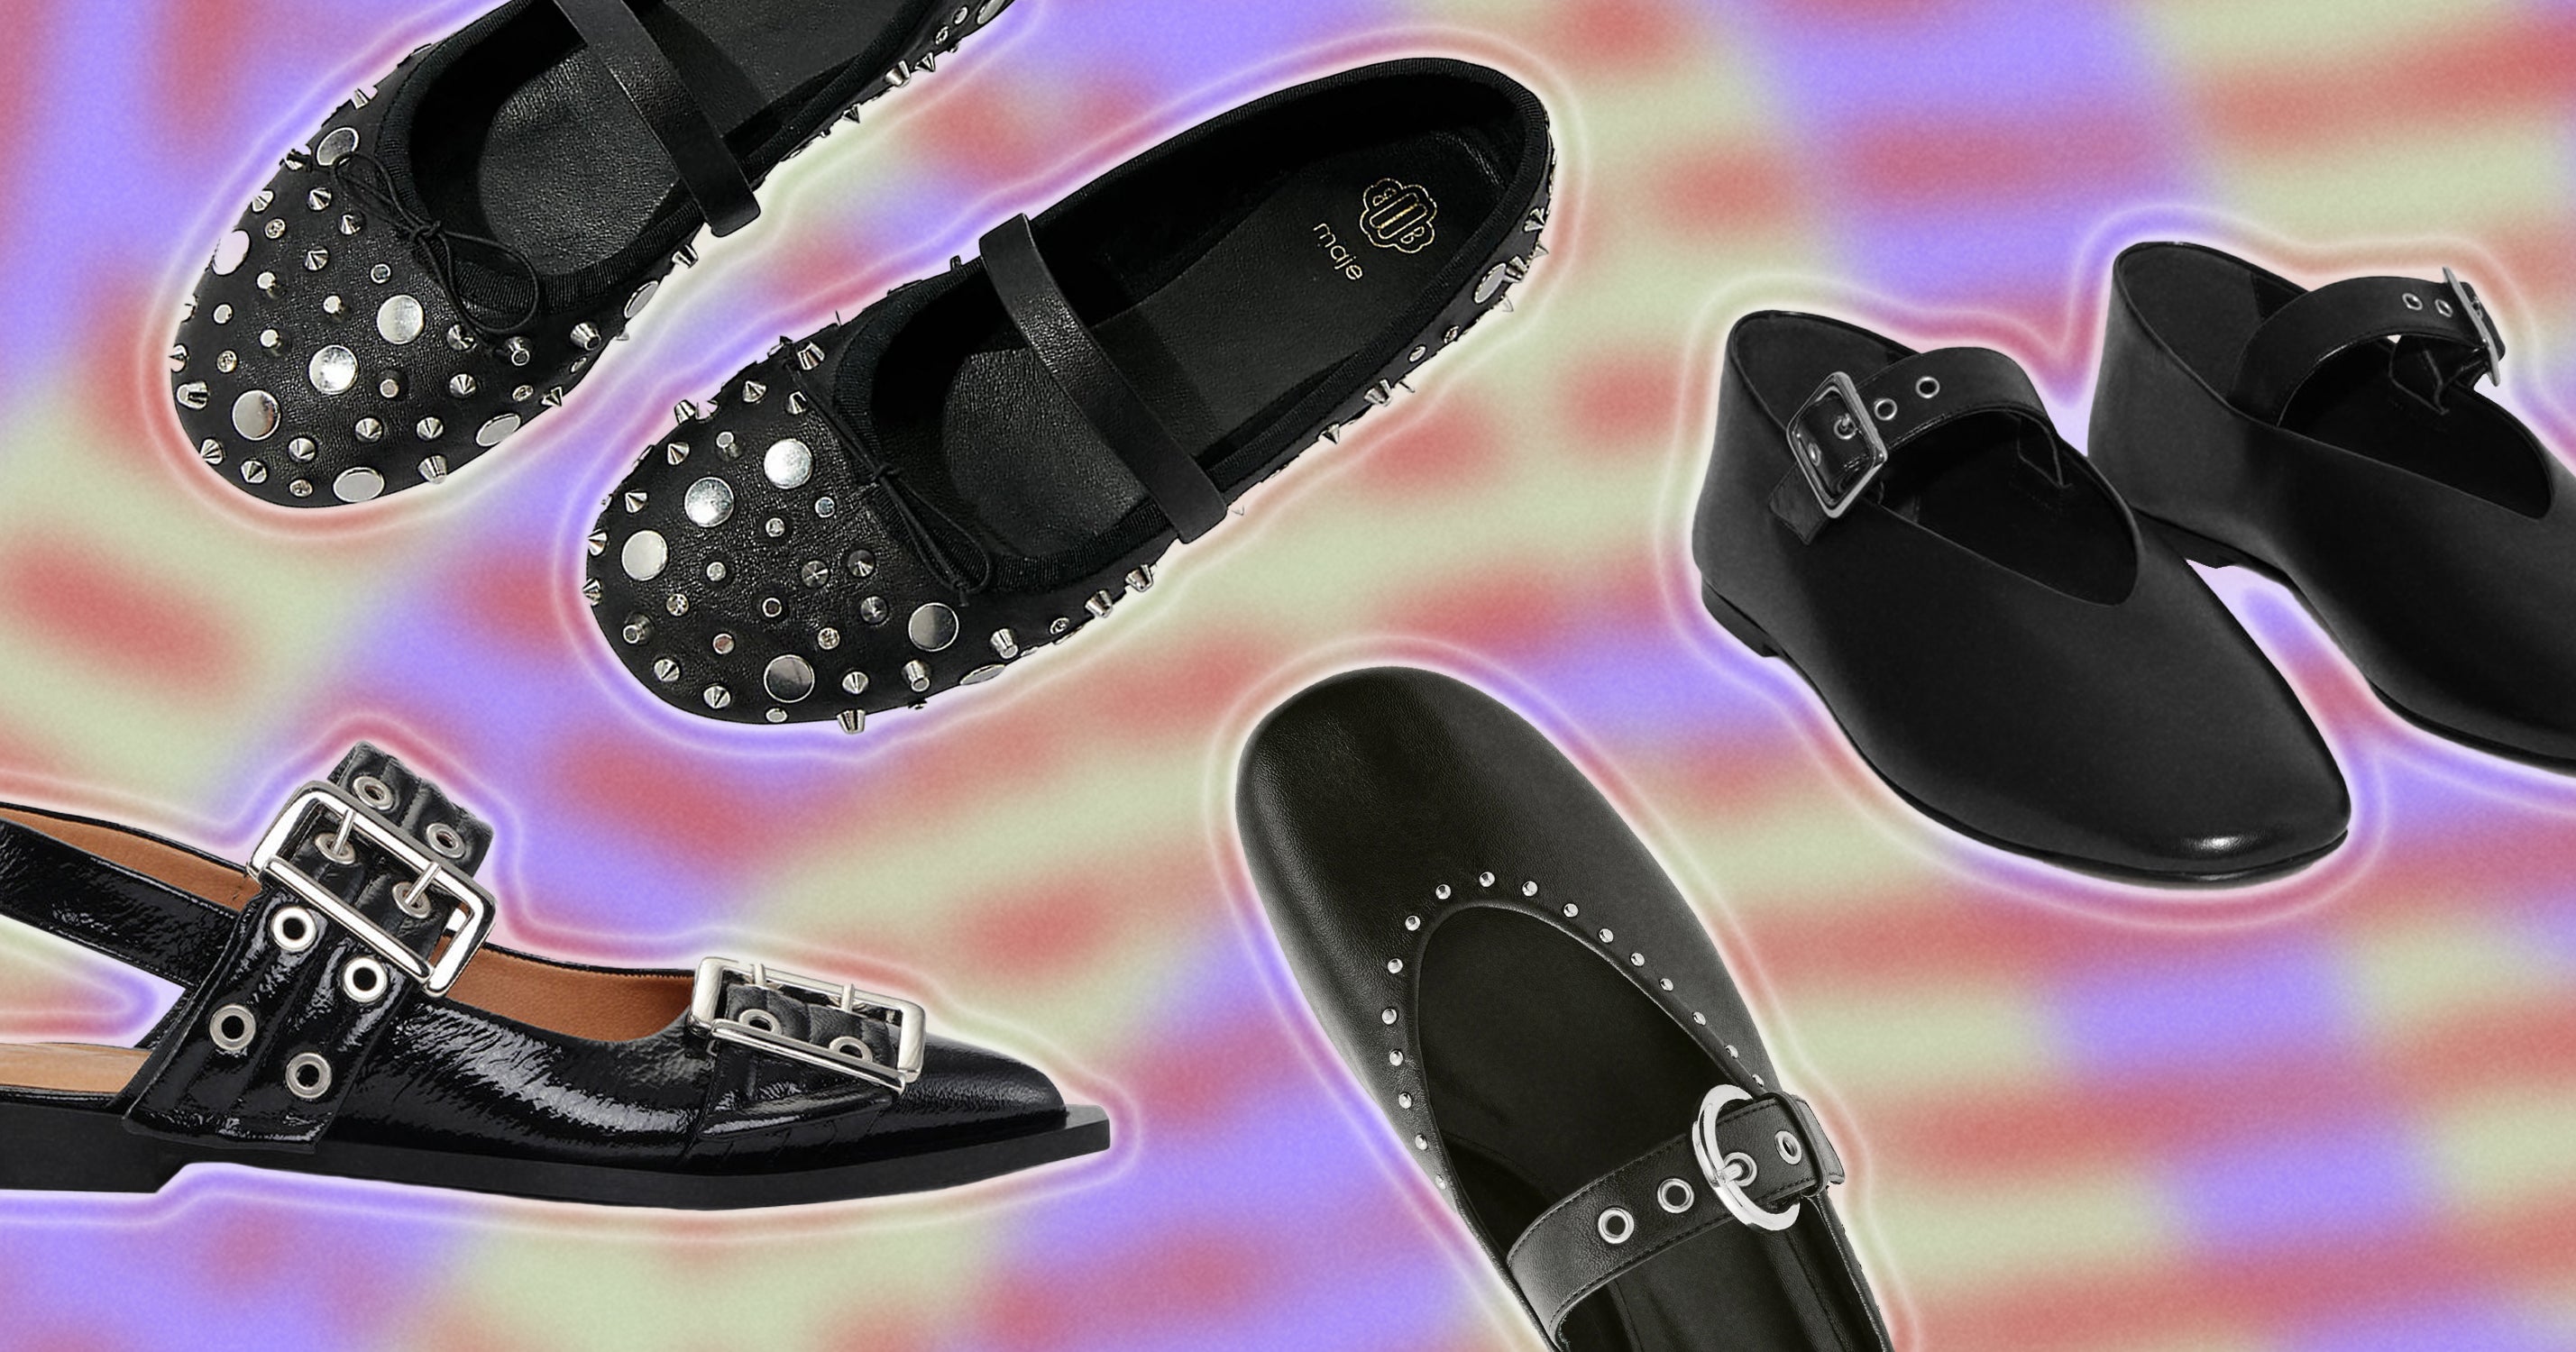 Spiked Ballet Flats Are The Standout Shoe Of The Season, Thanks To Ganni